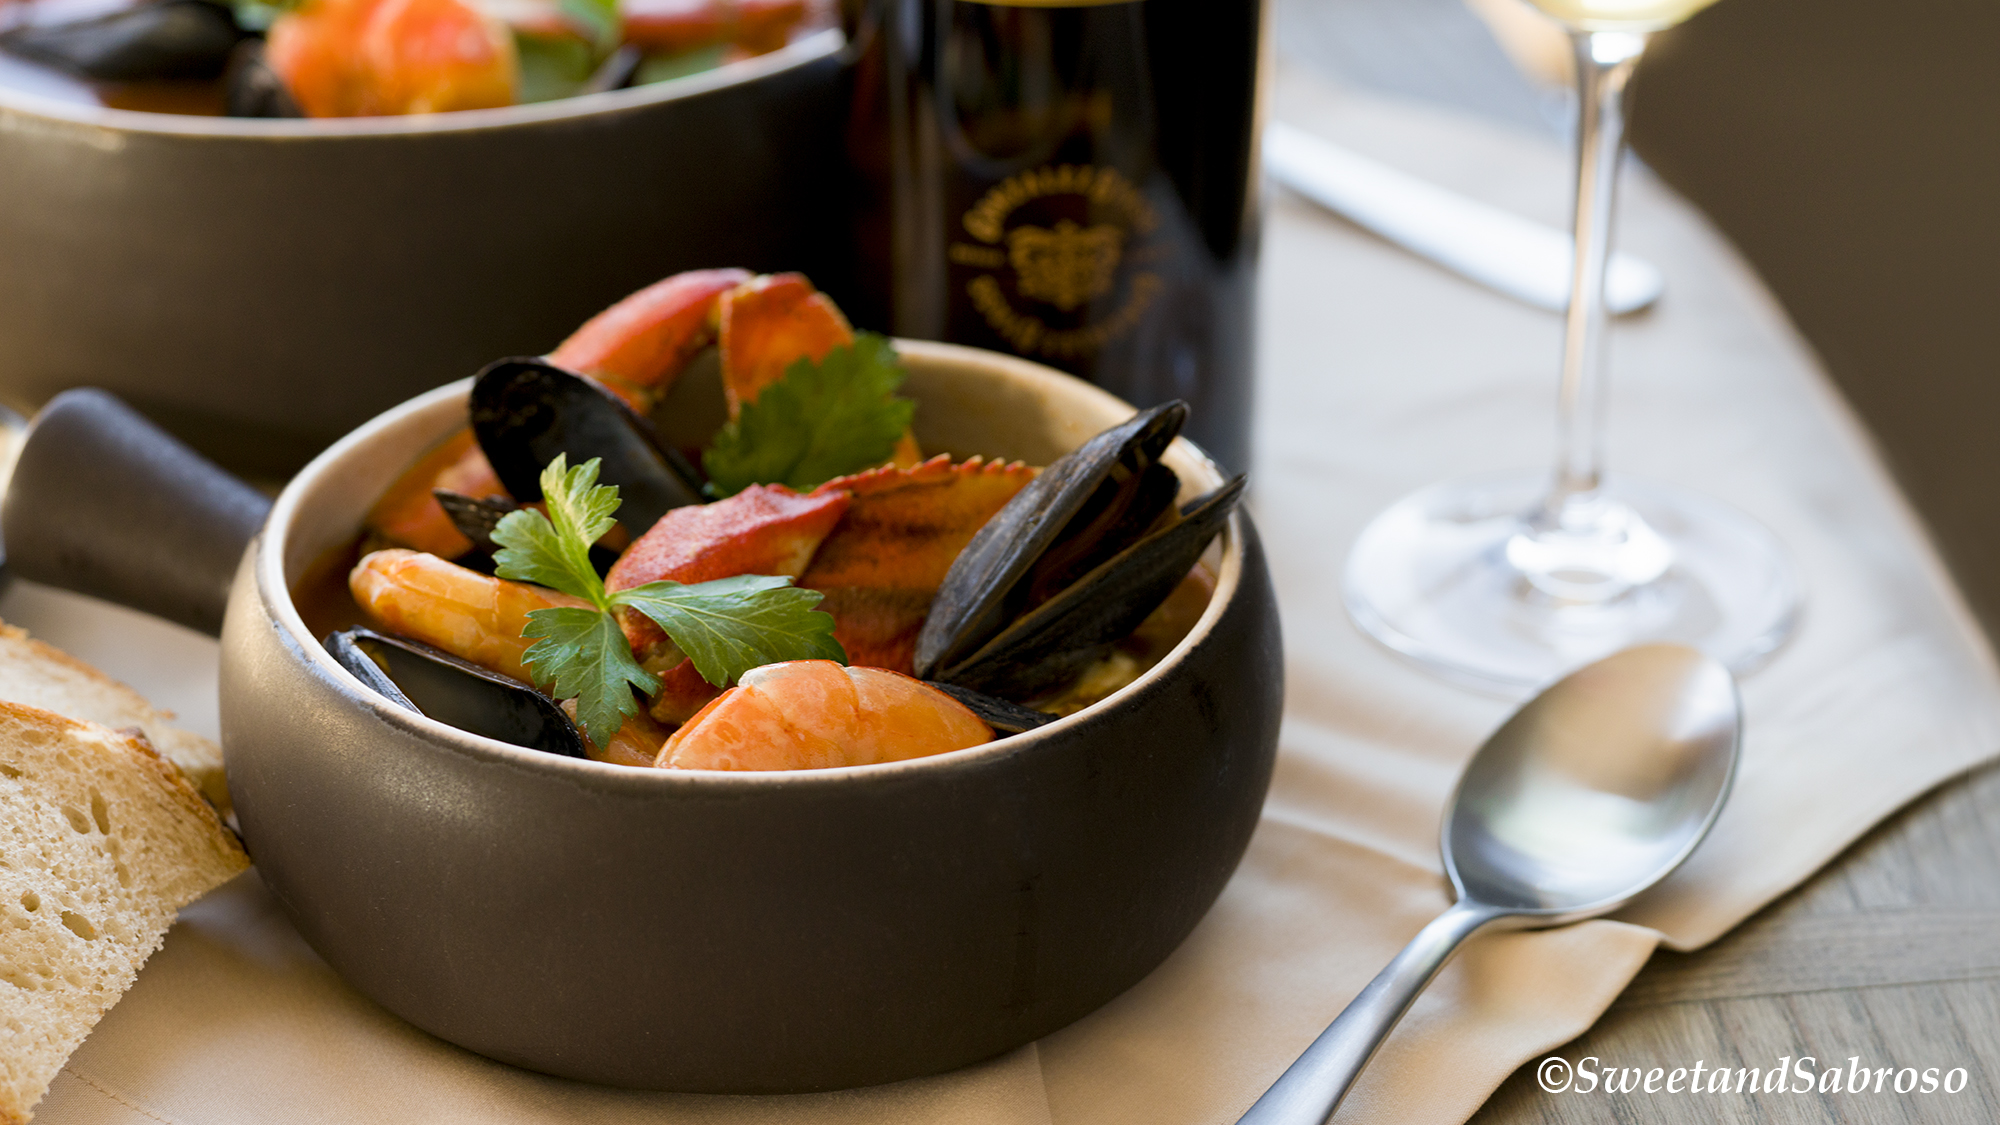 California-Coastal-Seafood-Stew-In-A-Bowl-With-Shrimp-Mussels-Dungeness-Crab-Garnished-with-Parsley-With-Serving-Bowl-And-Wine-In-Background